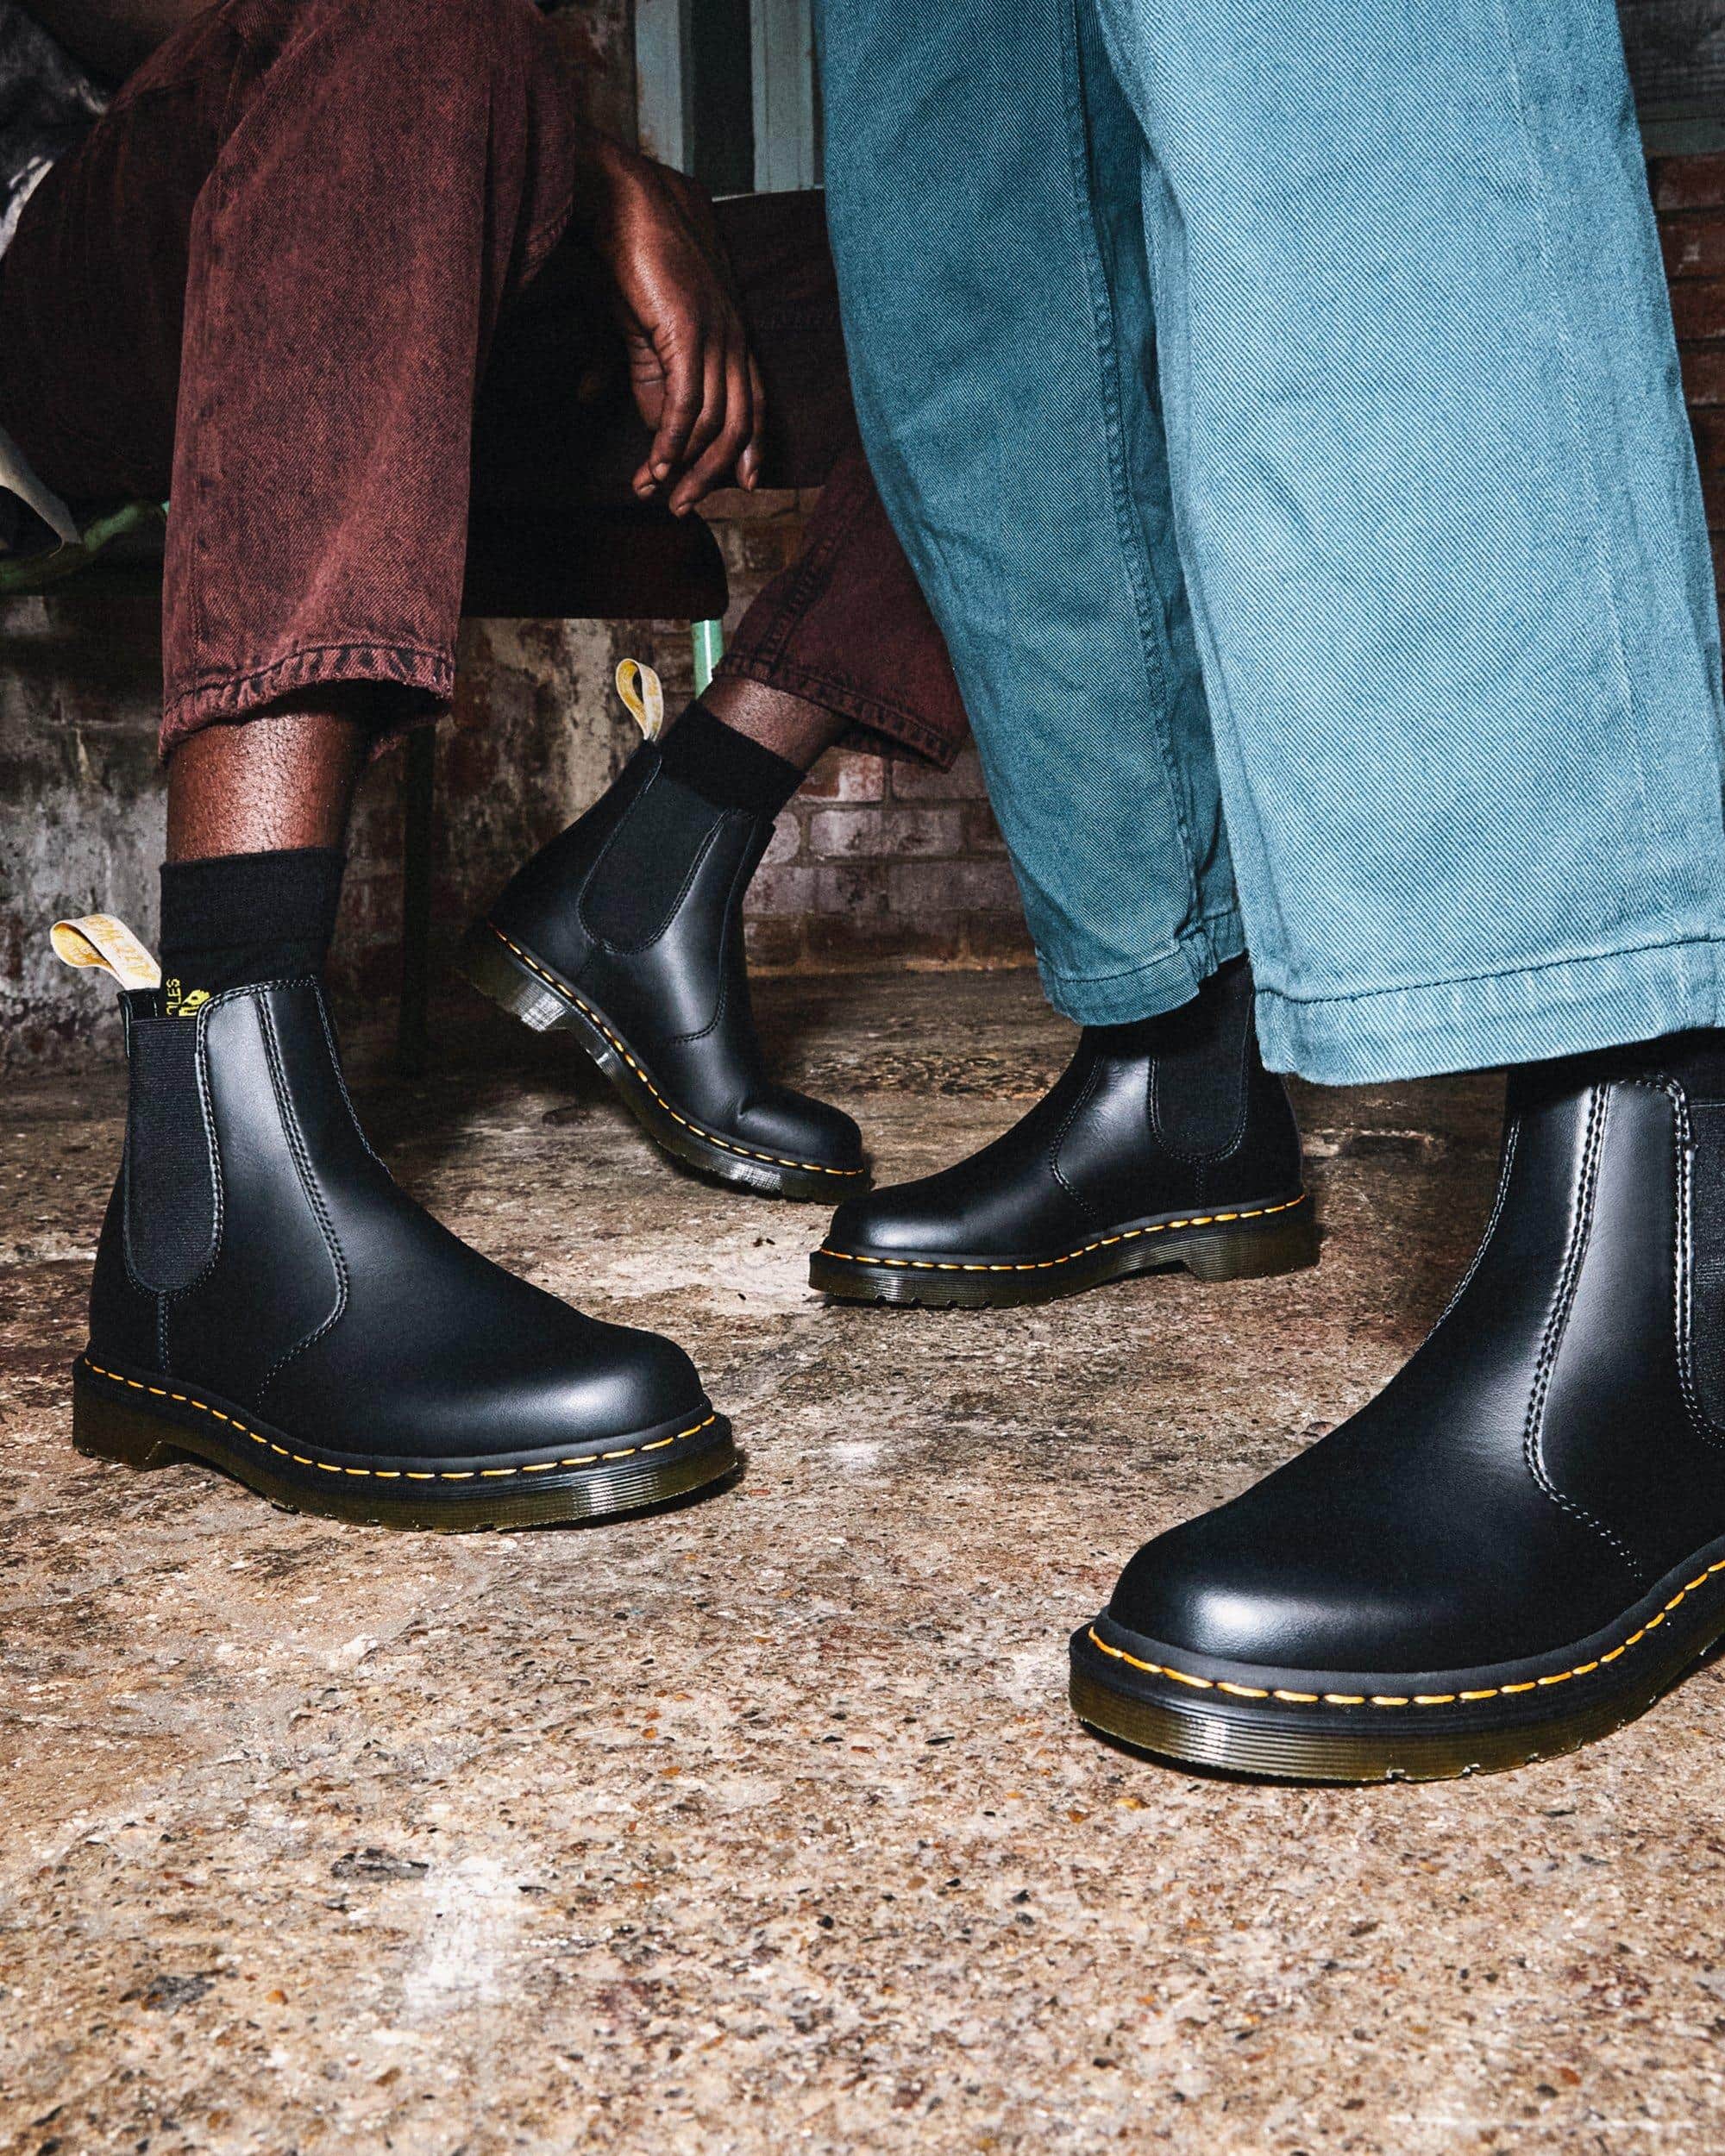 These vegan-friendly slip-on Chelsea boots are made from vegan compliant—no animal products